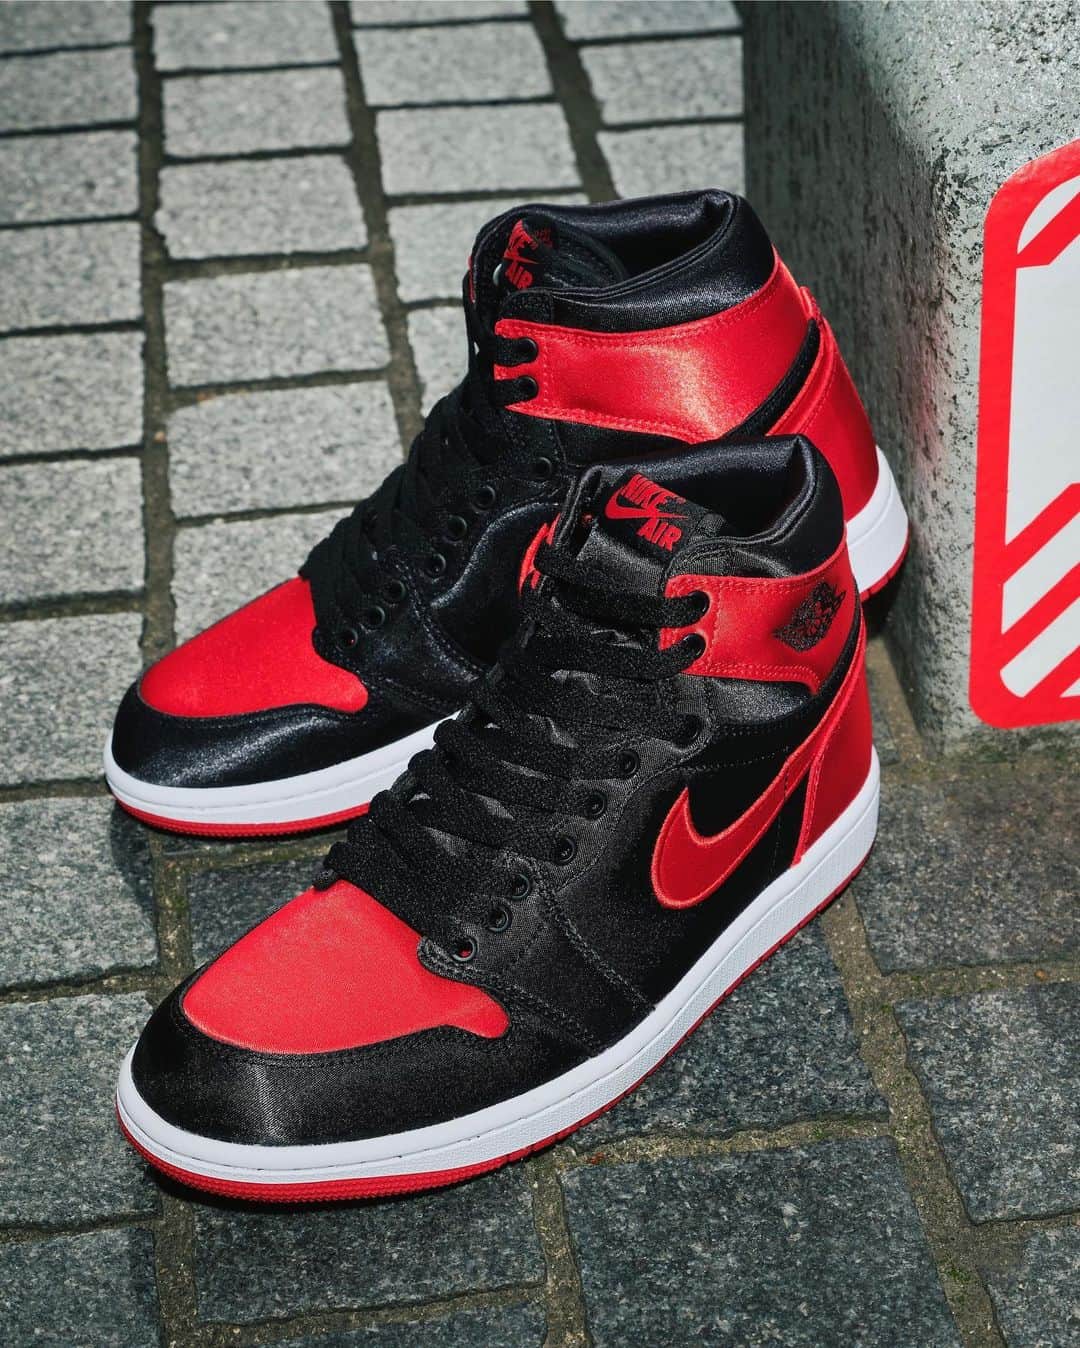 アトモスのインスタグラム：「. WMNS AIR JORDAN 1 HIGH OG "Satin Bred"	  AIR JORDAN 1を履いたら、スポットライトが当たっていると思って欲しい。1985年のオリジナルとブラックとレッドのカラーをベースに光沢のあるサテンを使い、そんな光を跳ね返す一足が登場する。 2016年に発売された501足限定の"Satin Bred"の復刻にあたる本作は、2ndシューレースで雰囲気を変えたり、ダブル使いのスタイルを楽しんだりもできる。ギアを入れて持ち運べるJumpmanバッグも付属している。 本商品は現在atmos-tokyo com にて抽選受付中 。 10月18日(水)より atmos 各店 一部店舗除く 、 atmos オンラインにて発売致します。  WMNS AIR JORDAN 1 HIGH OG "Satin Bred"	  When you wear the AIR JORDAN 1, you want to think you're in the spotlight, and with a glossy satin base in the black and red colors of the 1985 original, here comes a pair that bounces back in that light. This reissue of the "Satin Bred," which was limited to 501 pairs in 2016, also features a 2nd lacing for a different vibe or a double-use style. A Jumpman bag for carrying gear is also included. The product is currently being raffled off at atmos-tokyo.com. The shoes will be available at atmos stores and online from October 18 (Wed.).  #atmos #airjordan1 #aj1」